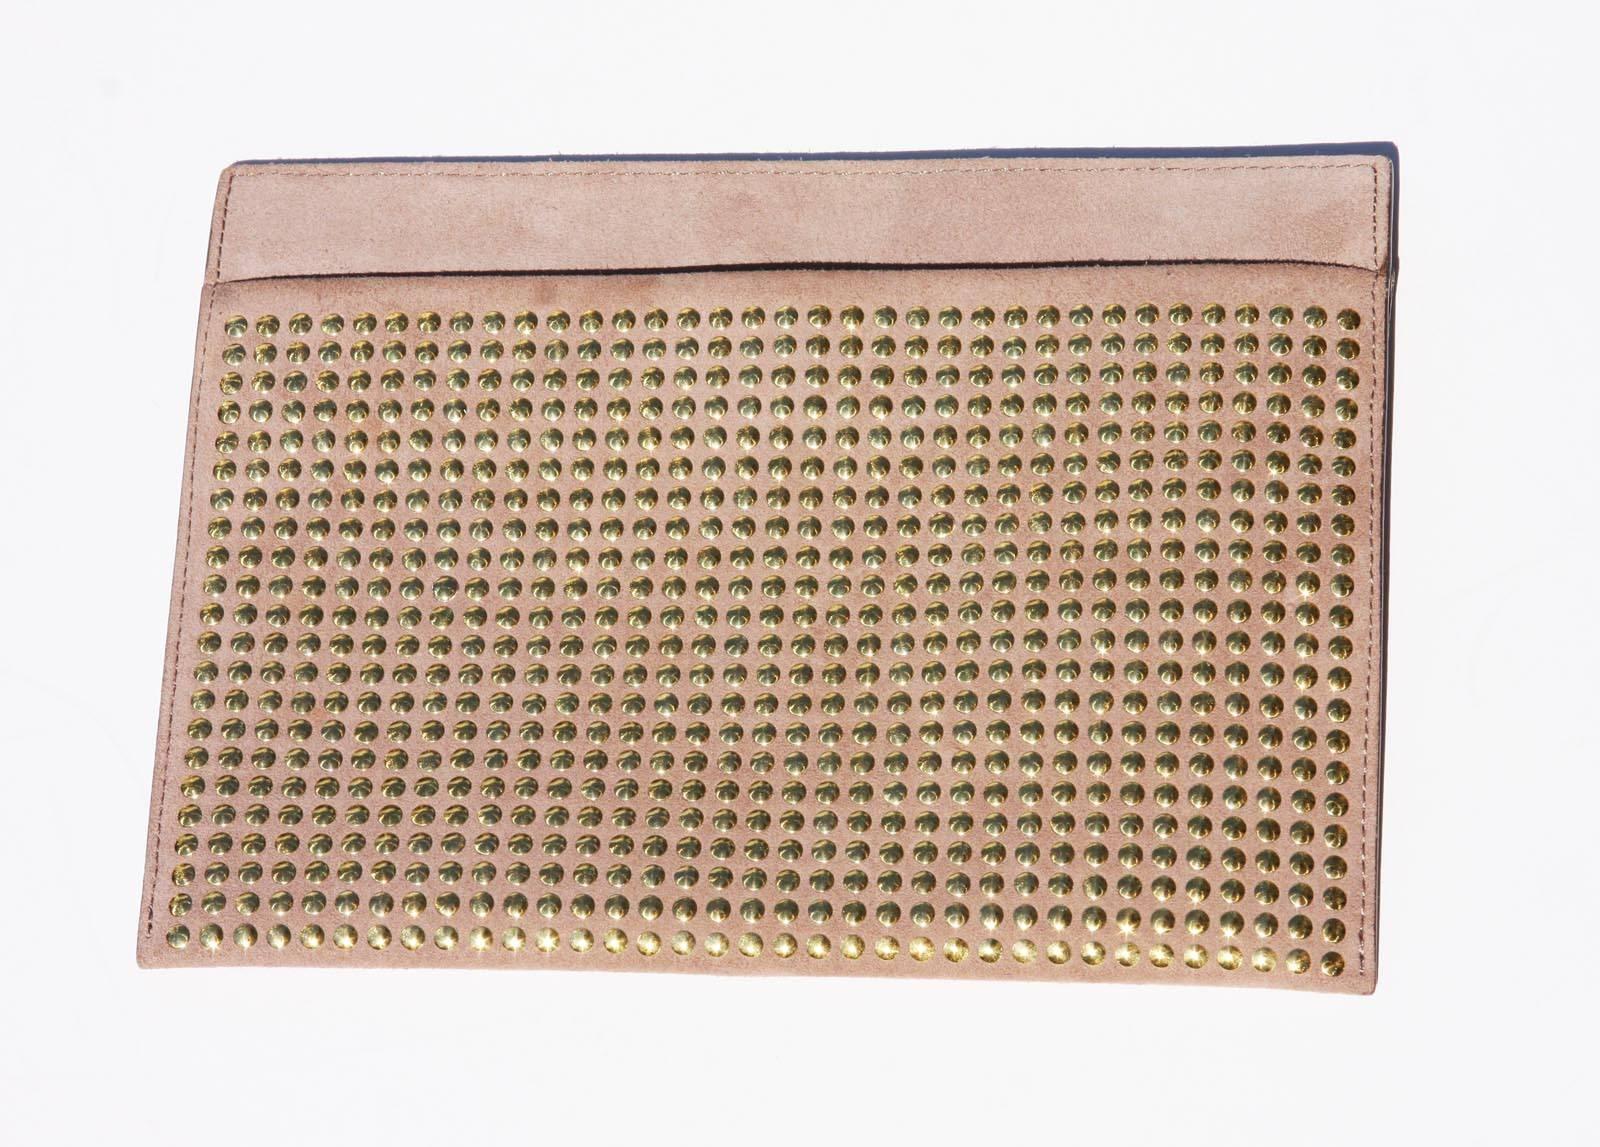 New Tom Ford Suede Studded Pouch with Gold tone Galvanized Hardware
Nude Color, Gold tone Metal Studs, Zipper Closure with Lock, Snap Closure at Back.
Measurements: W - 8 inches, H - 6 inches.
Retail $1190.00
Made in Italy
New with tag.